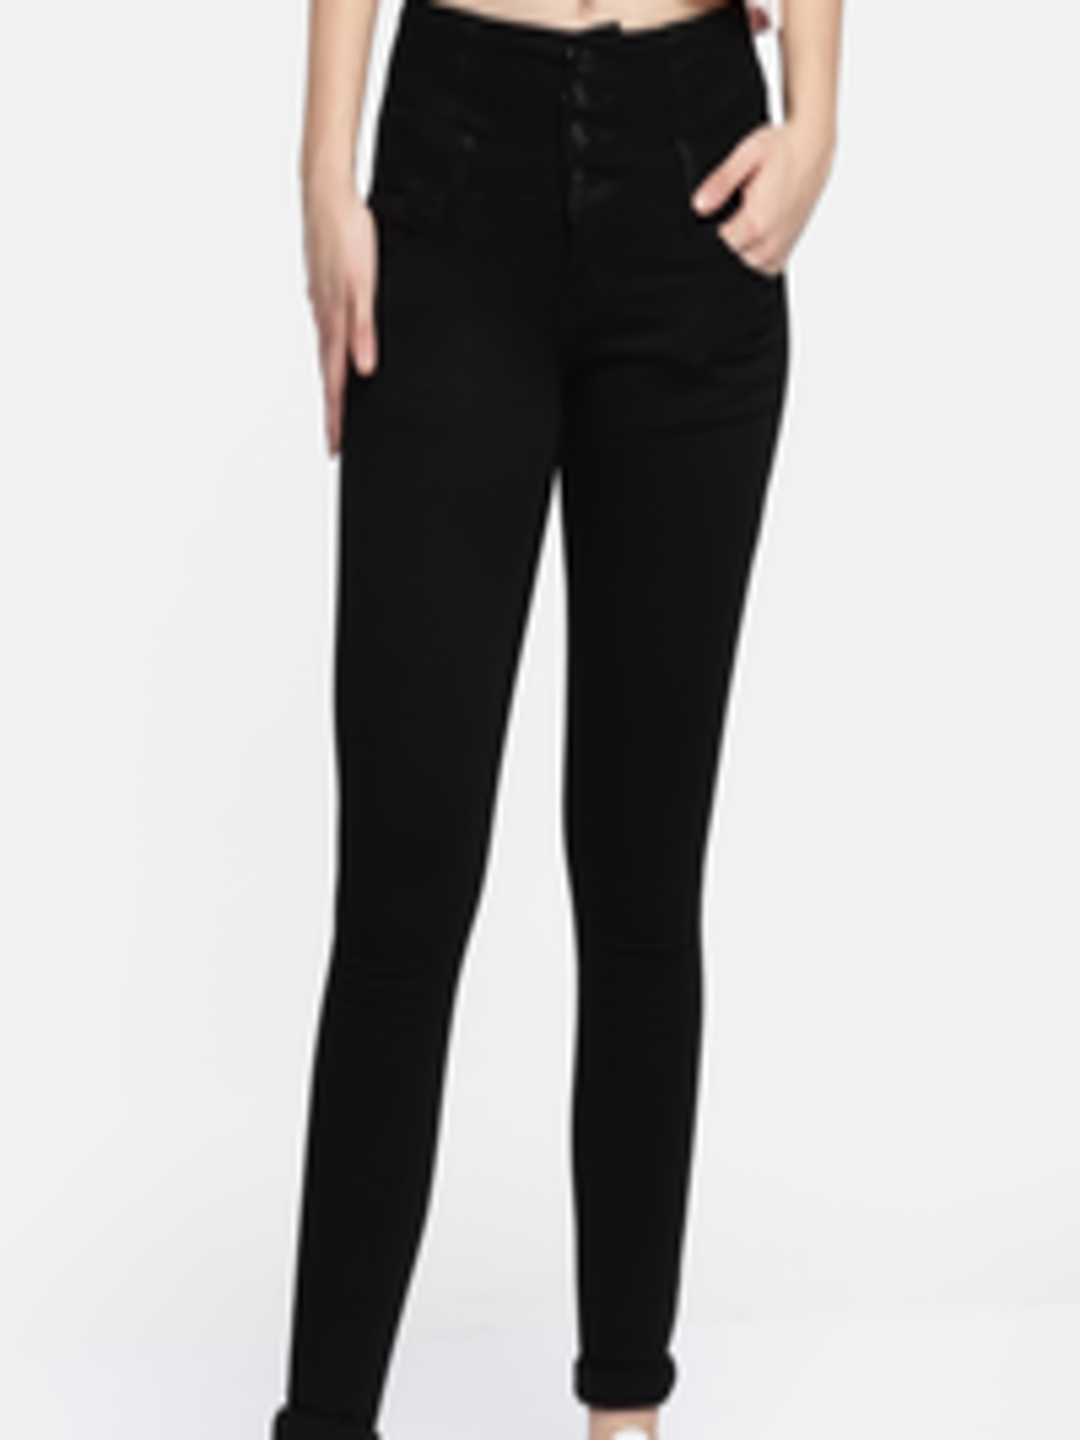 Buy Deal Jeans Women Black Slim Fit High Rise Clean Look Stretchable ...